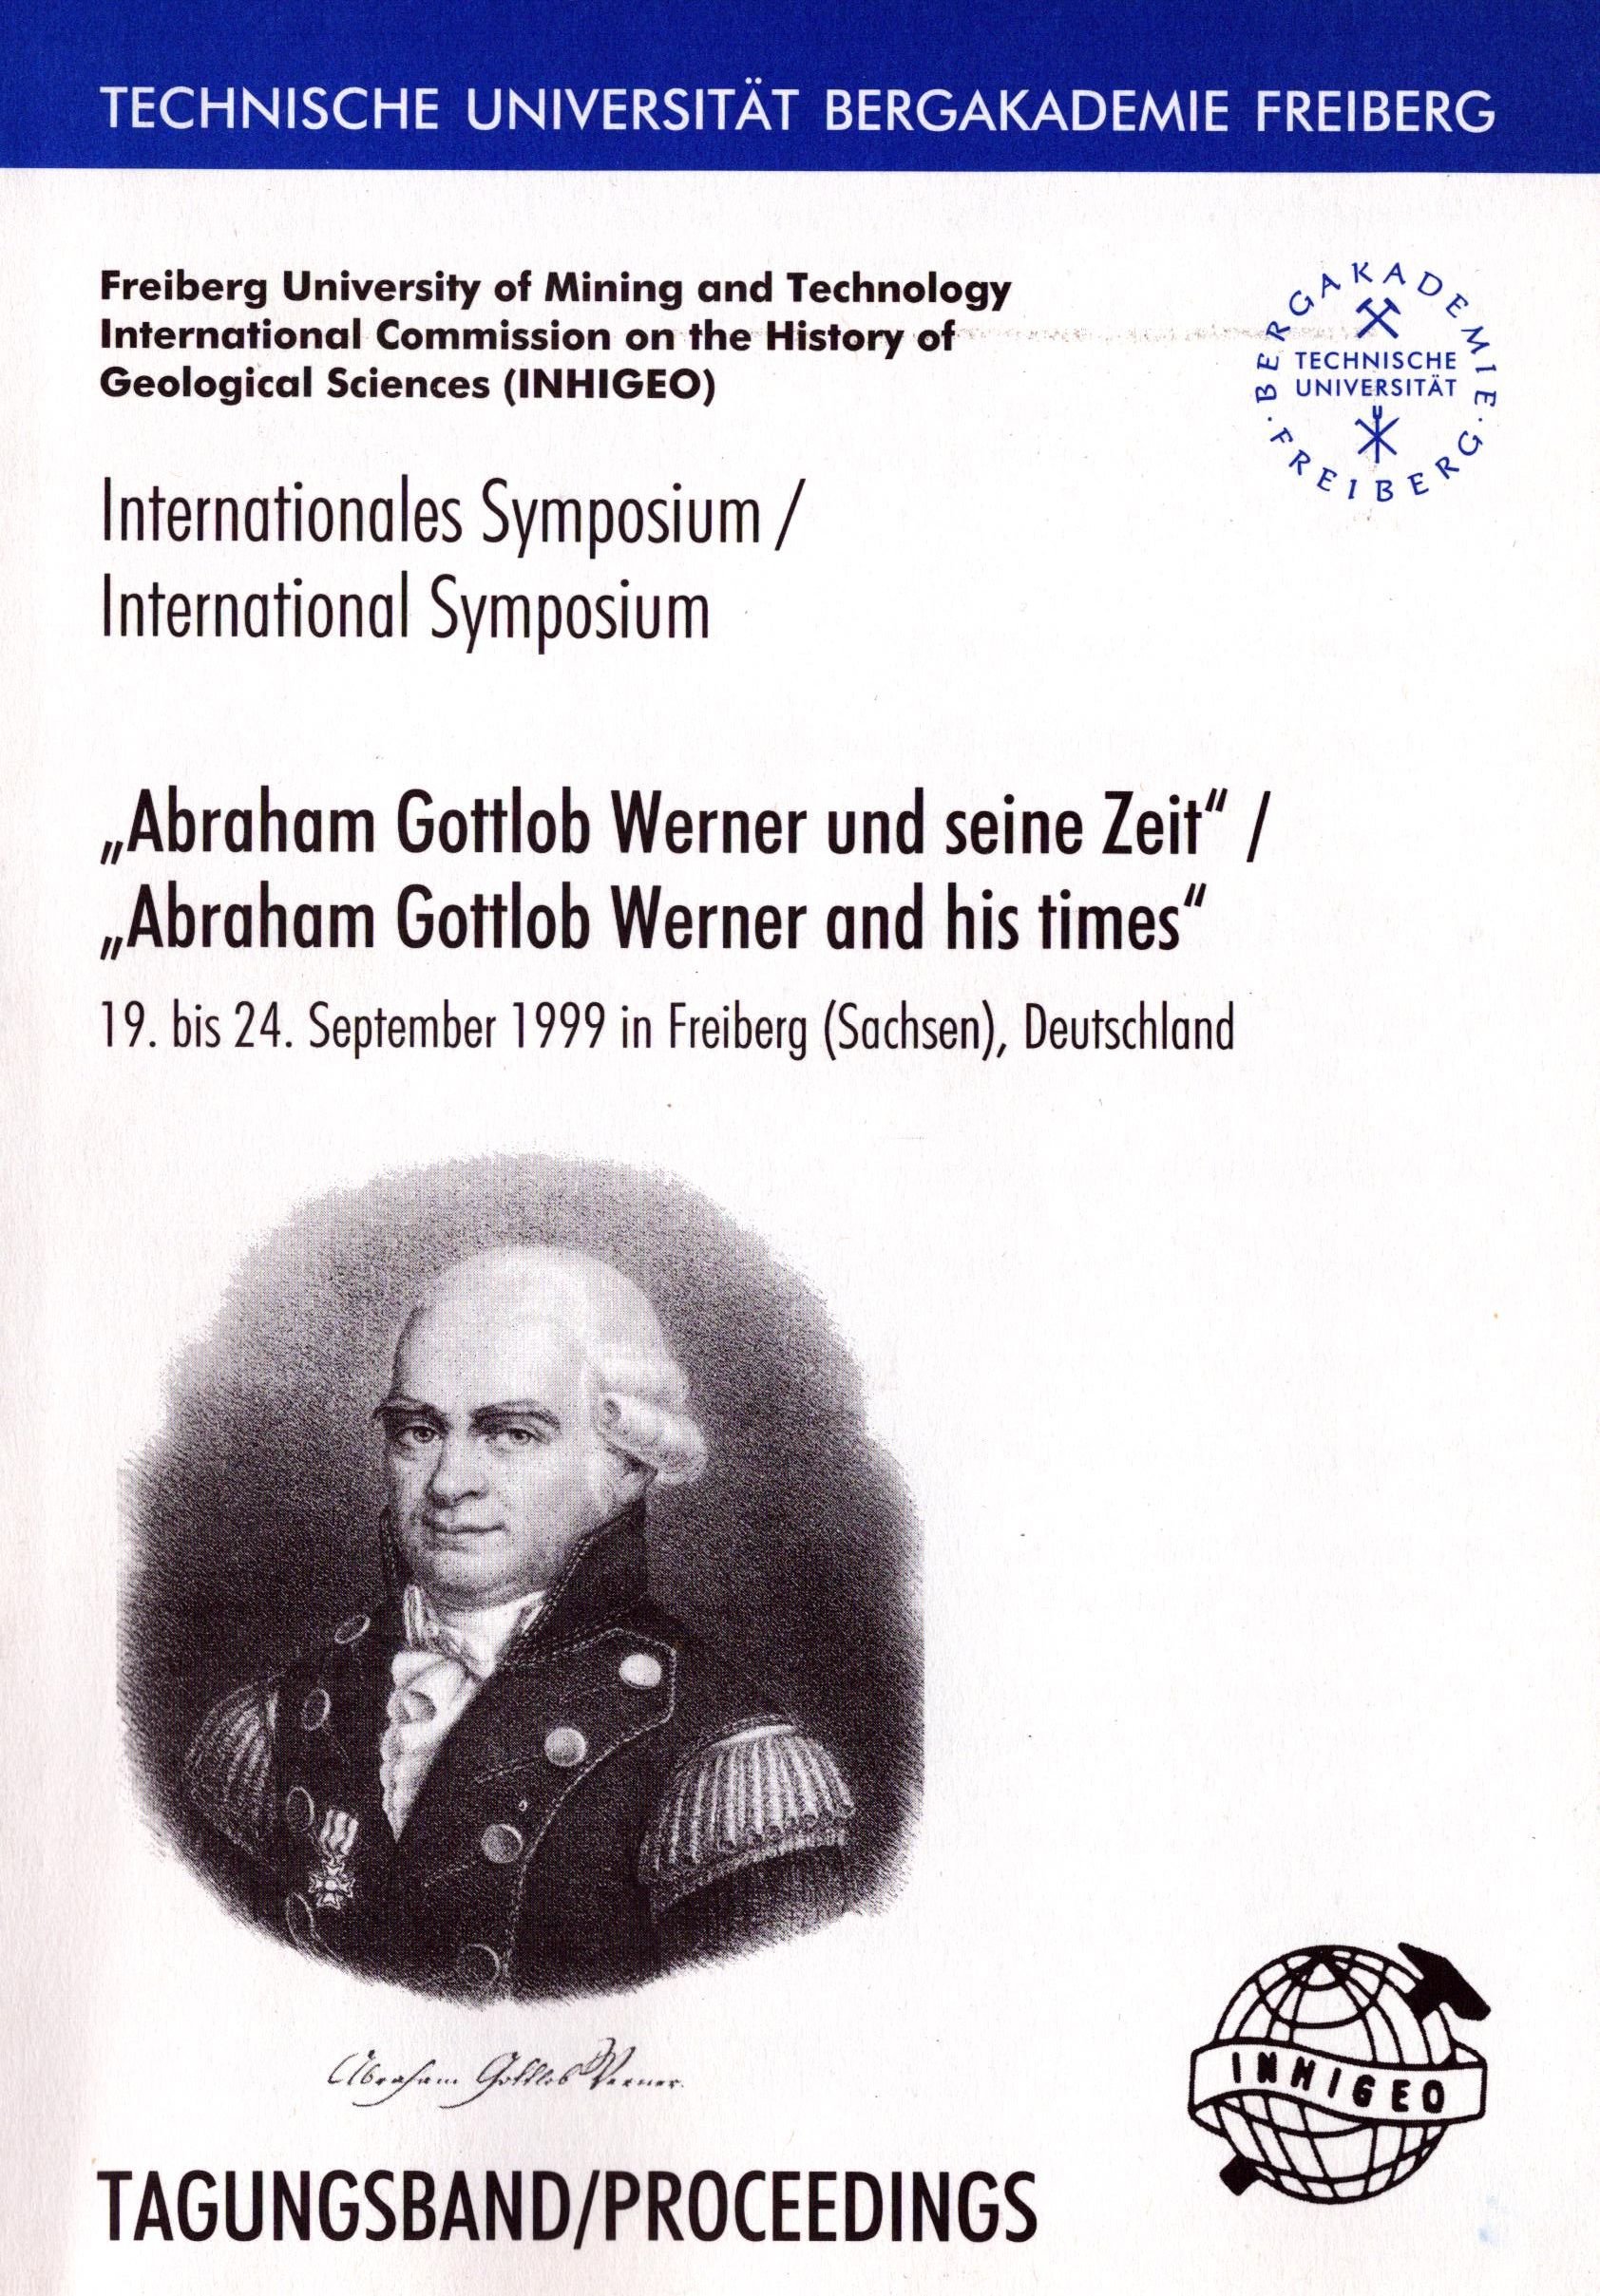 "Abraham Gottlob Werner and His Times" (Archiv SAXONIA-FREIBERG-STIFTUNG CC BY-NC-SA)